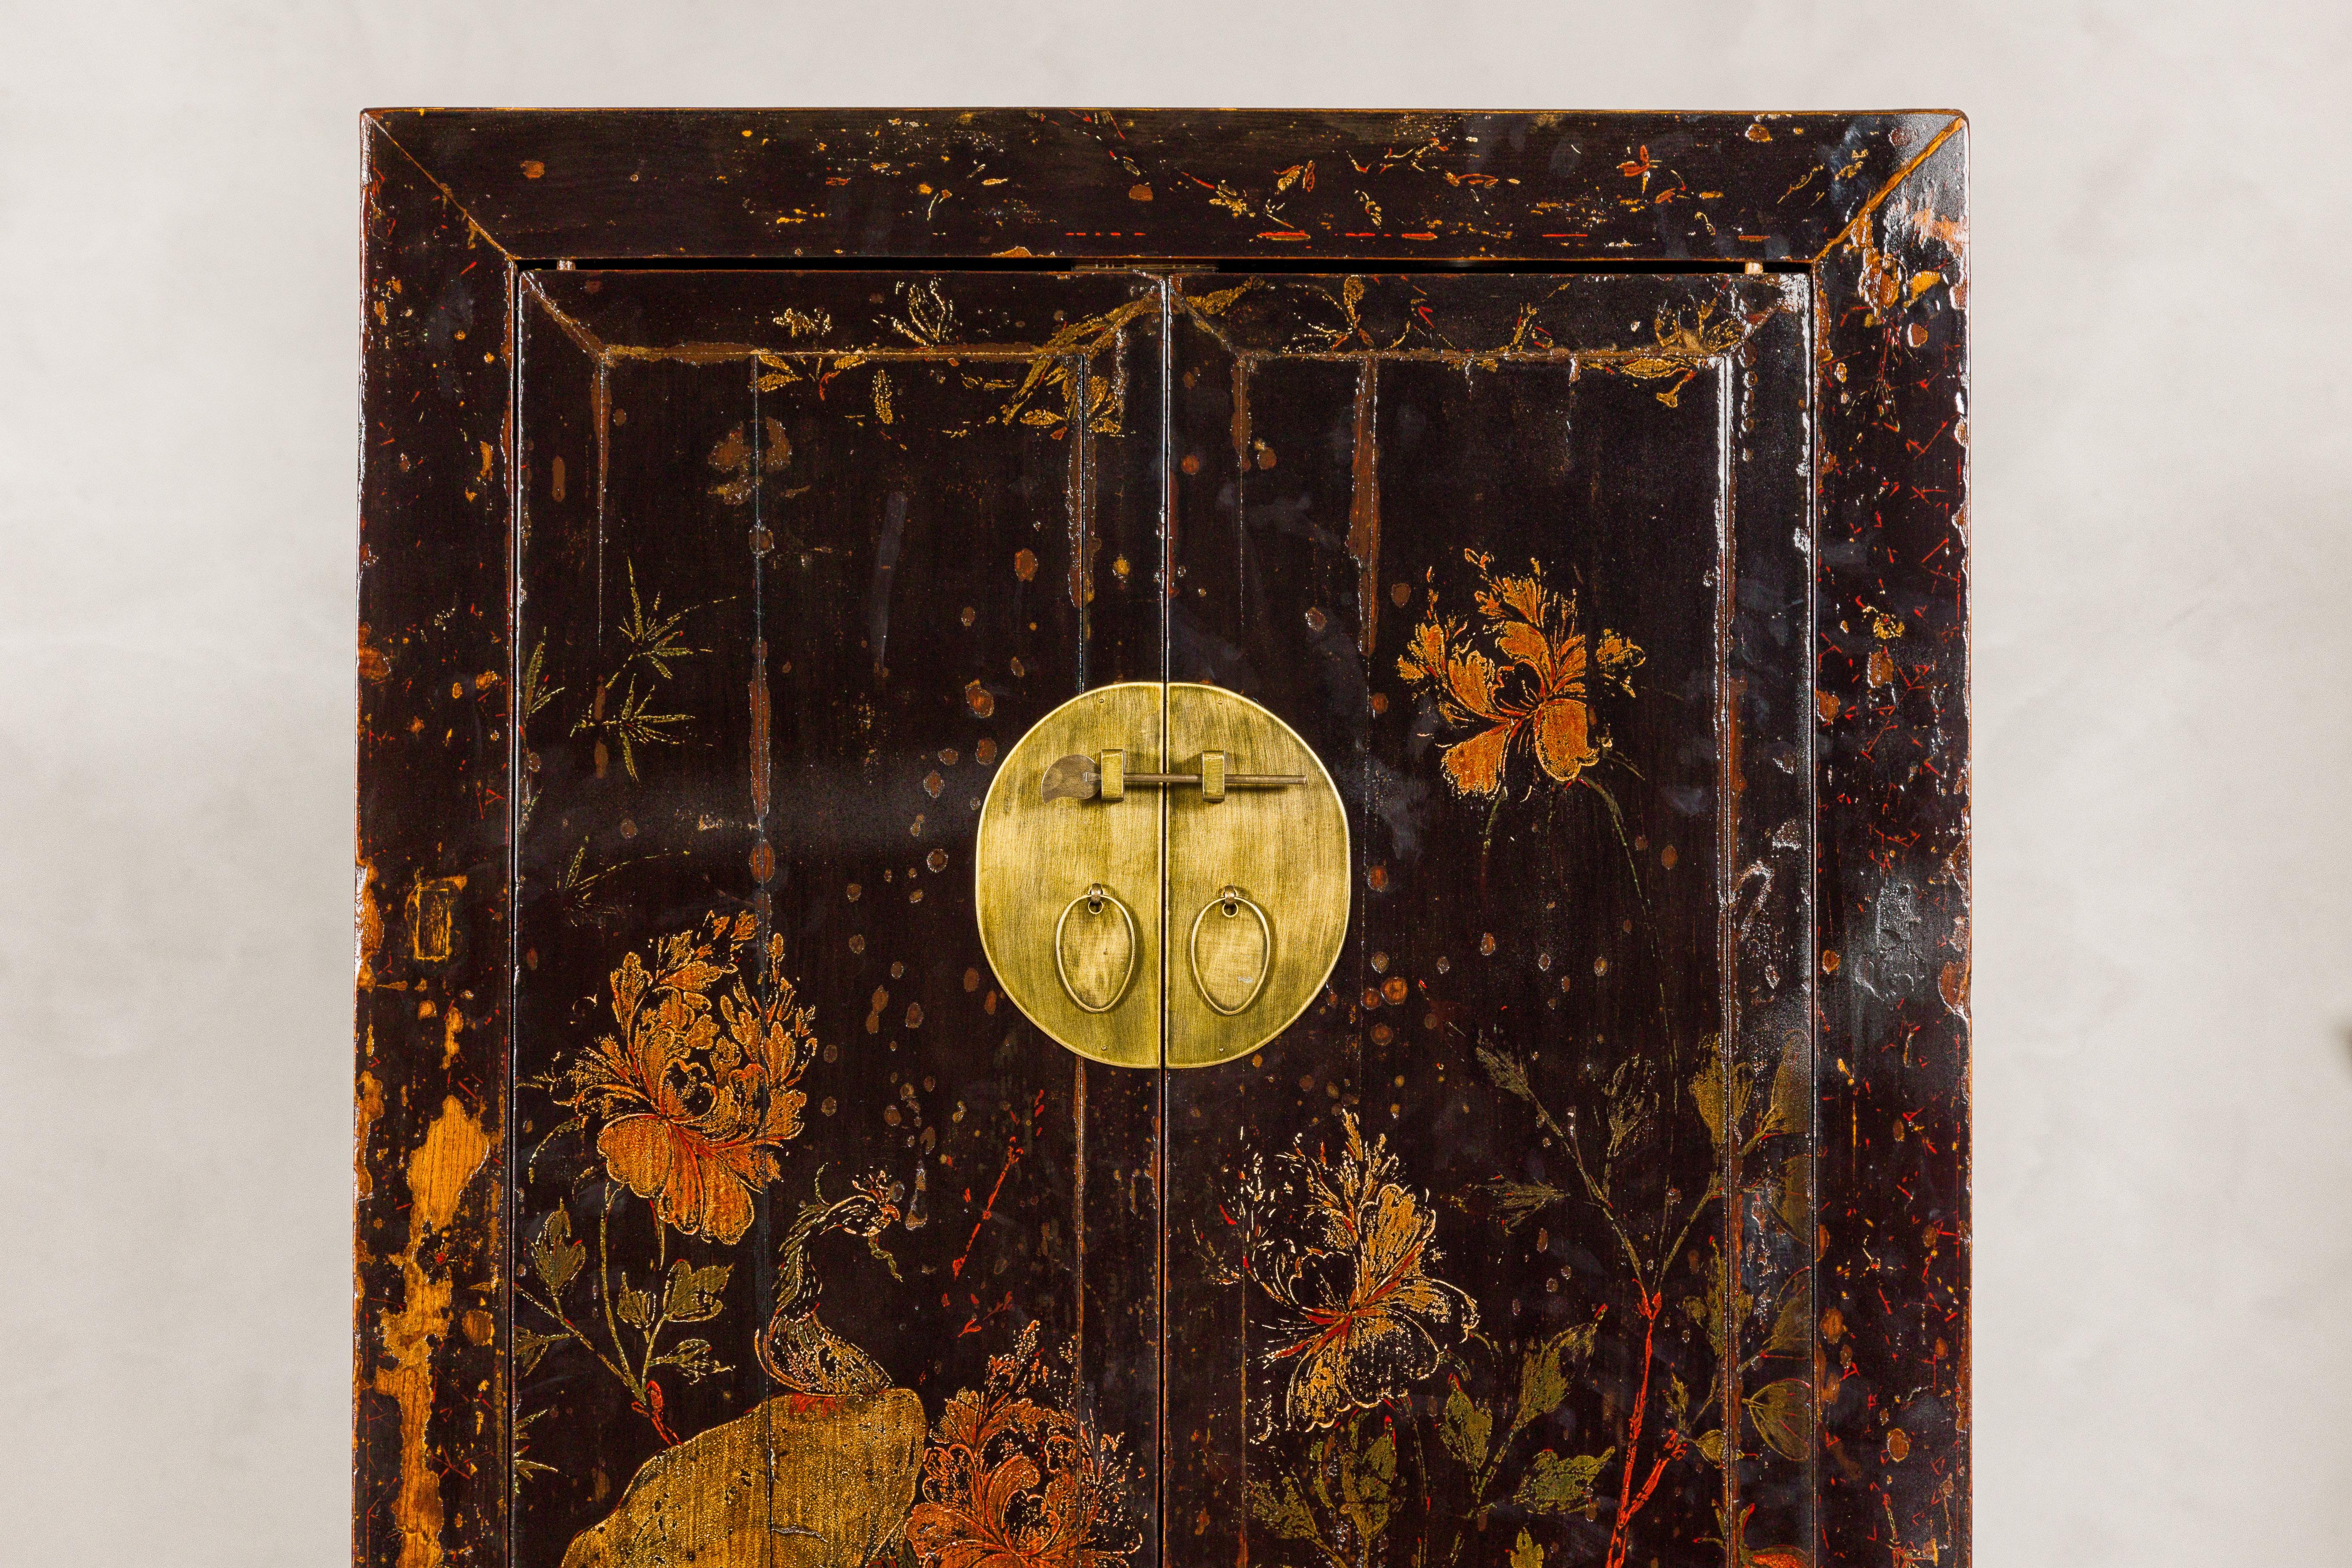 Qing Dynasty Hand-Painted Cabinet with Floral Décor, Doors and Drawers In Good Condition For Sale In Yonkers, NY